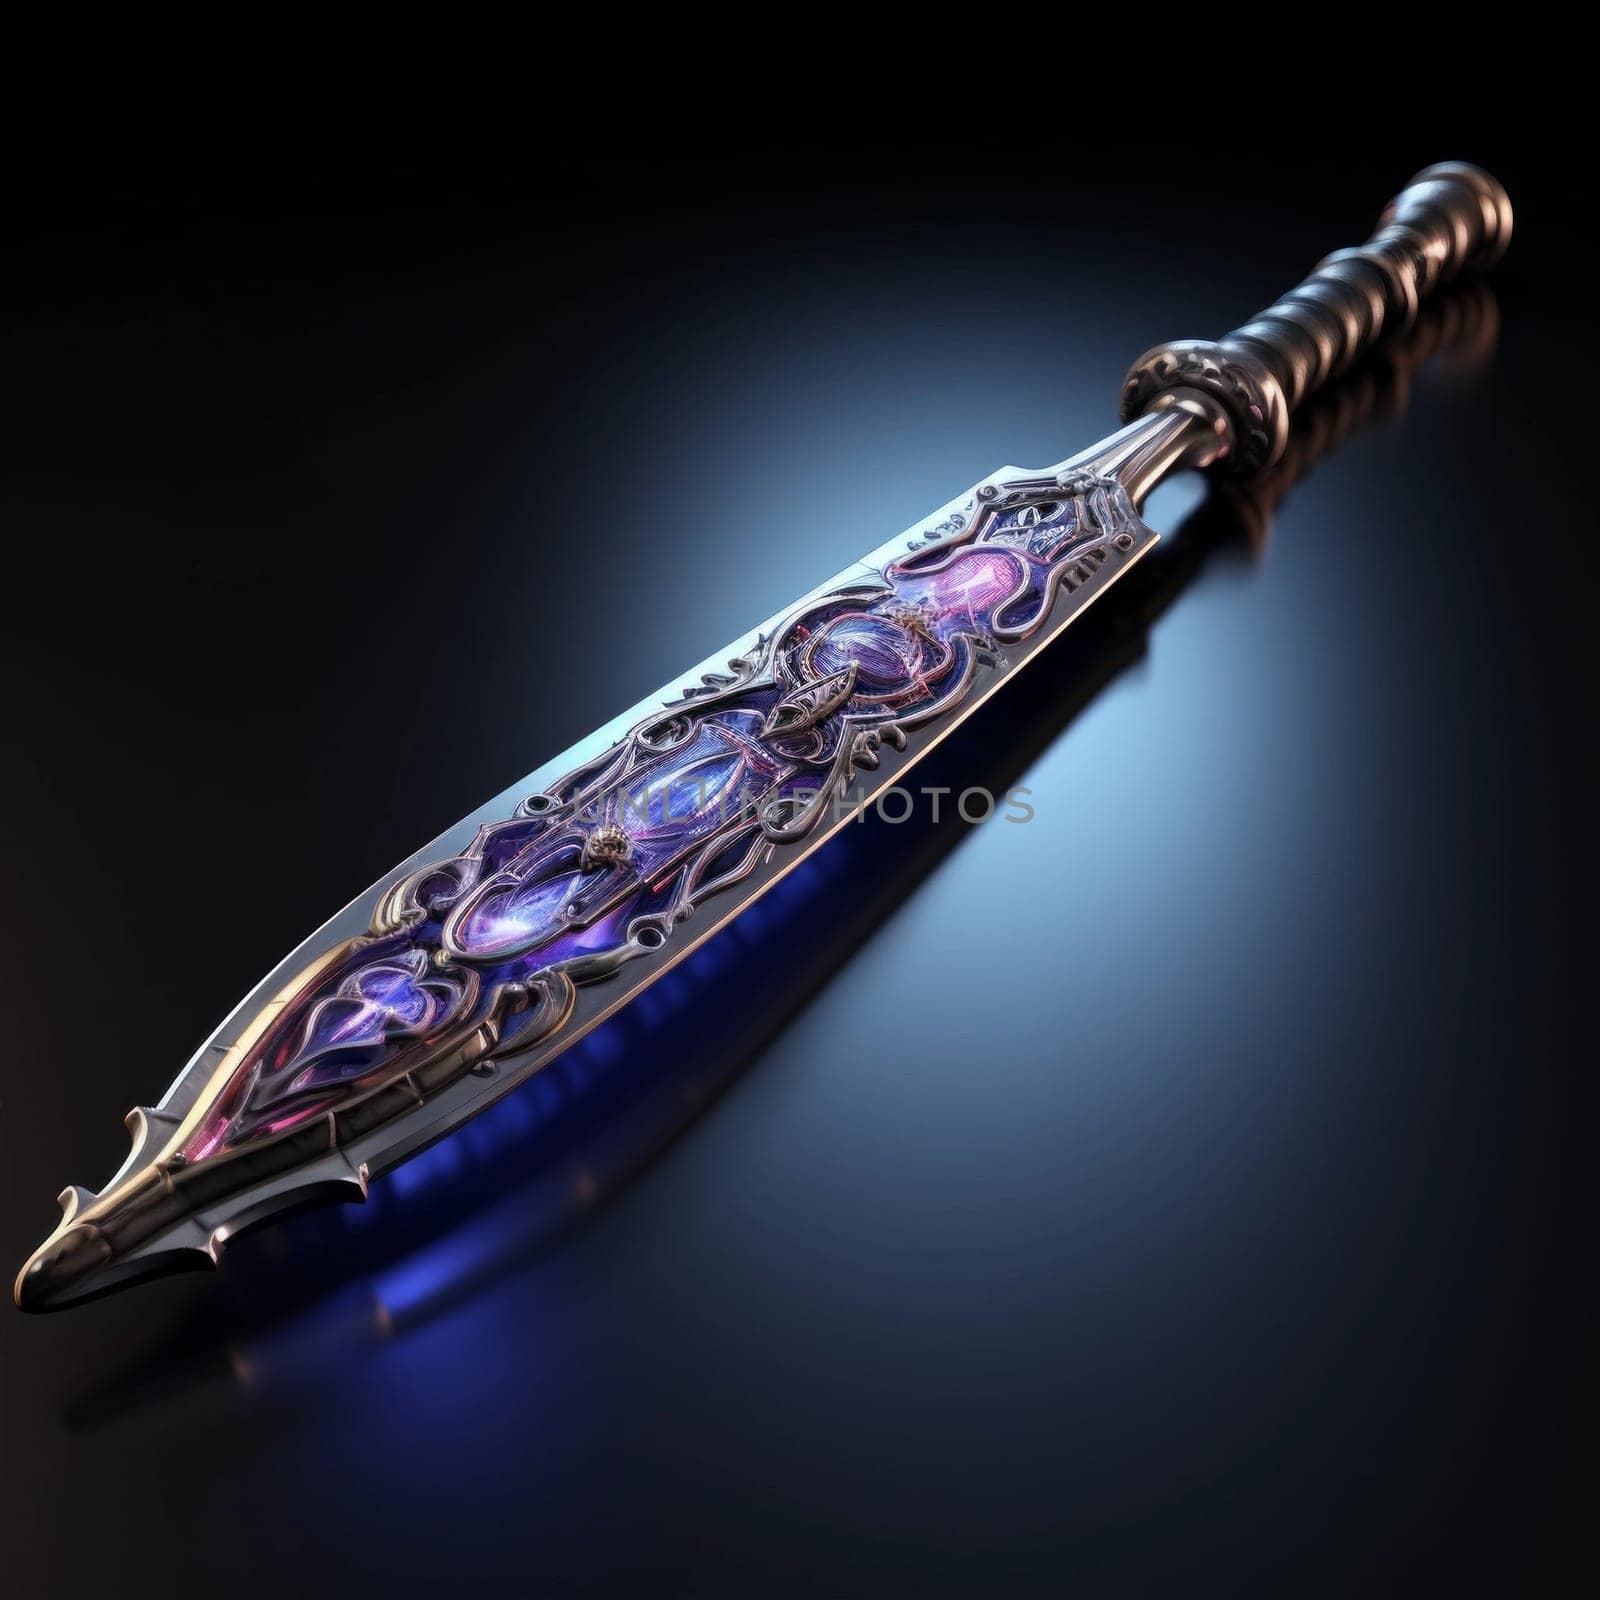 Magical Sword 3D Illustration. Mystical Graphic Asset isolated. by iliris